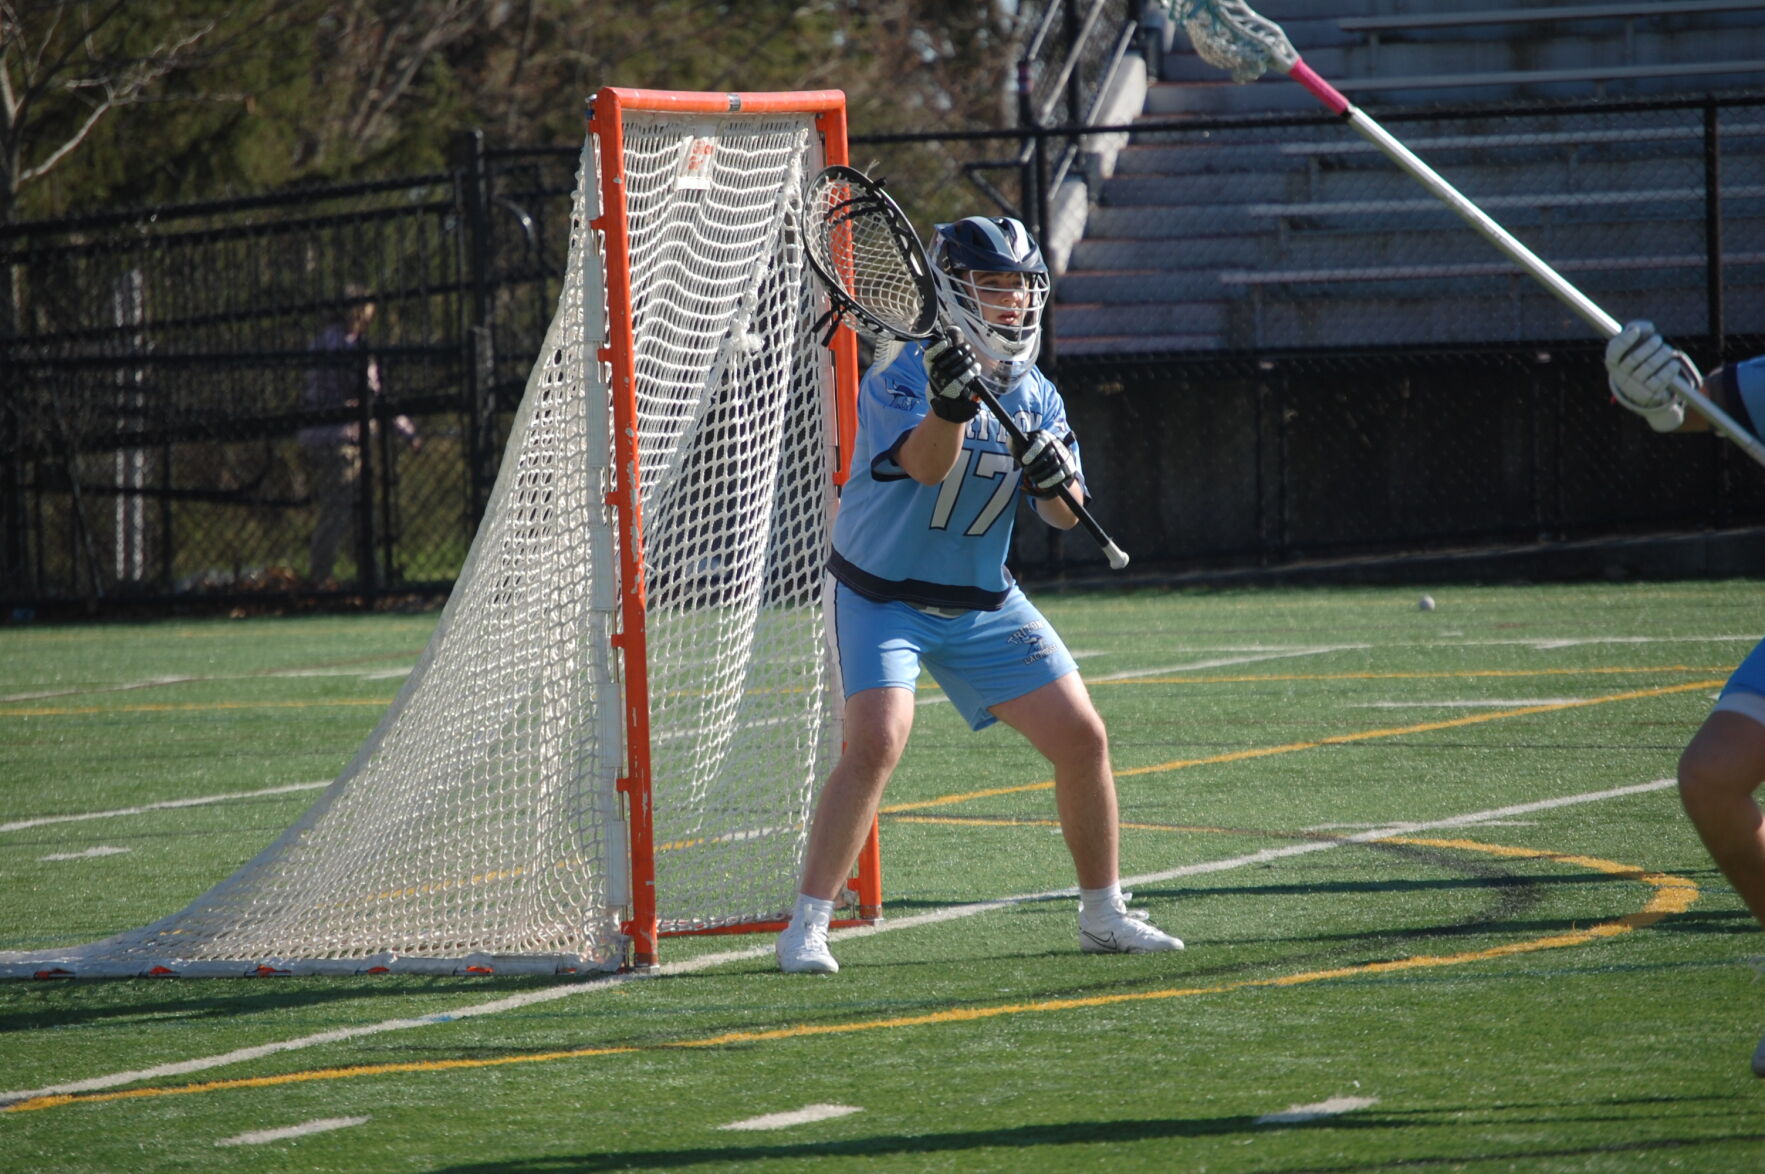 Triton Boys Lacrosse Triumphs Over Peabody as Senior Captain Shines with 15 Saves